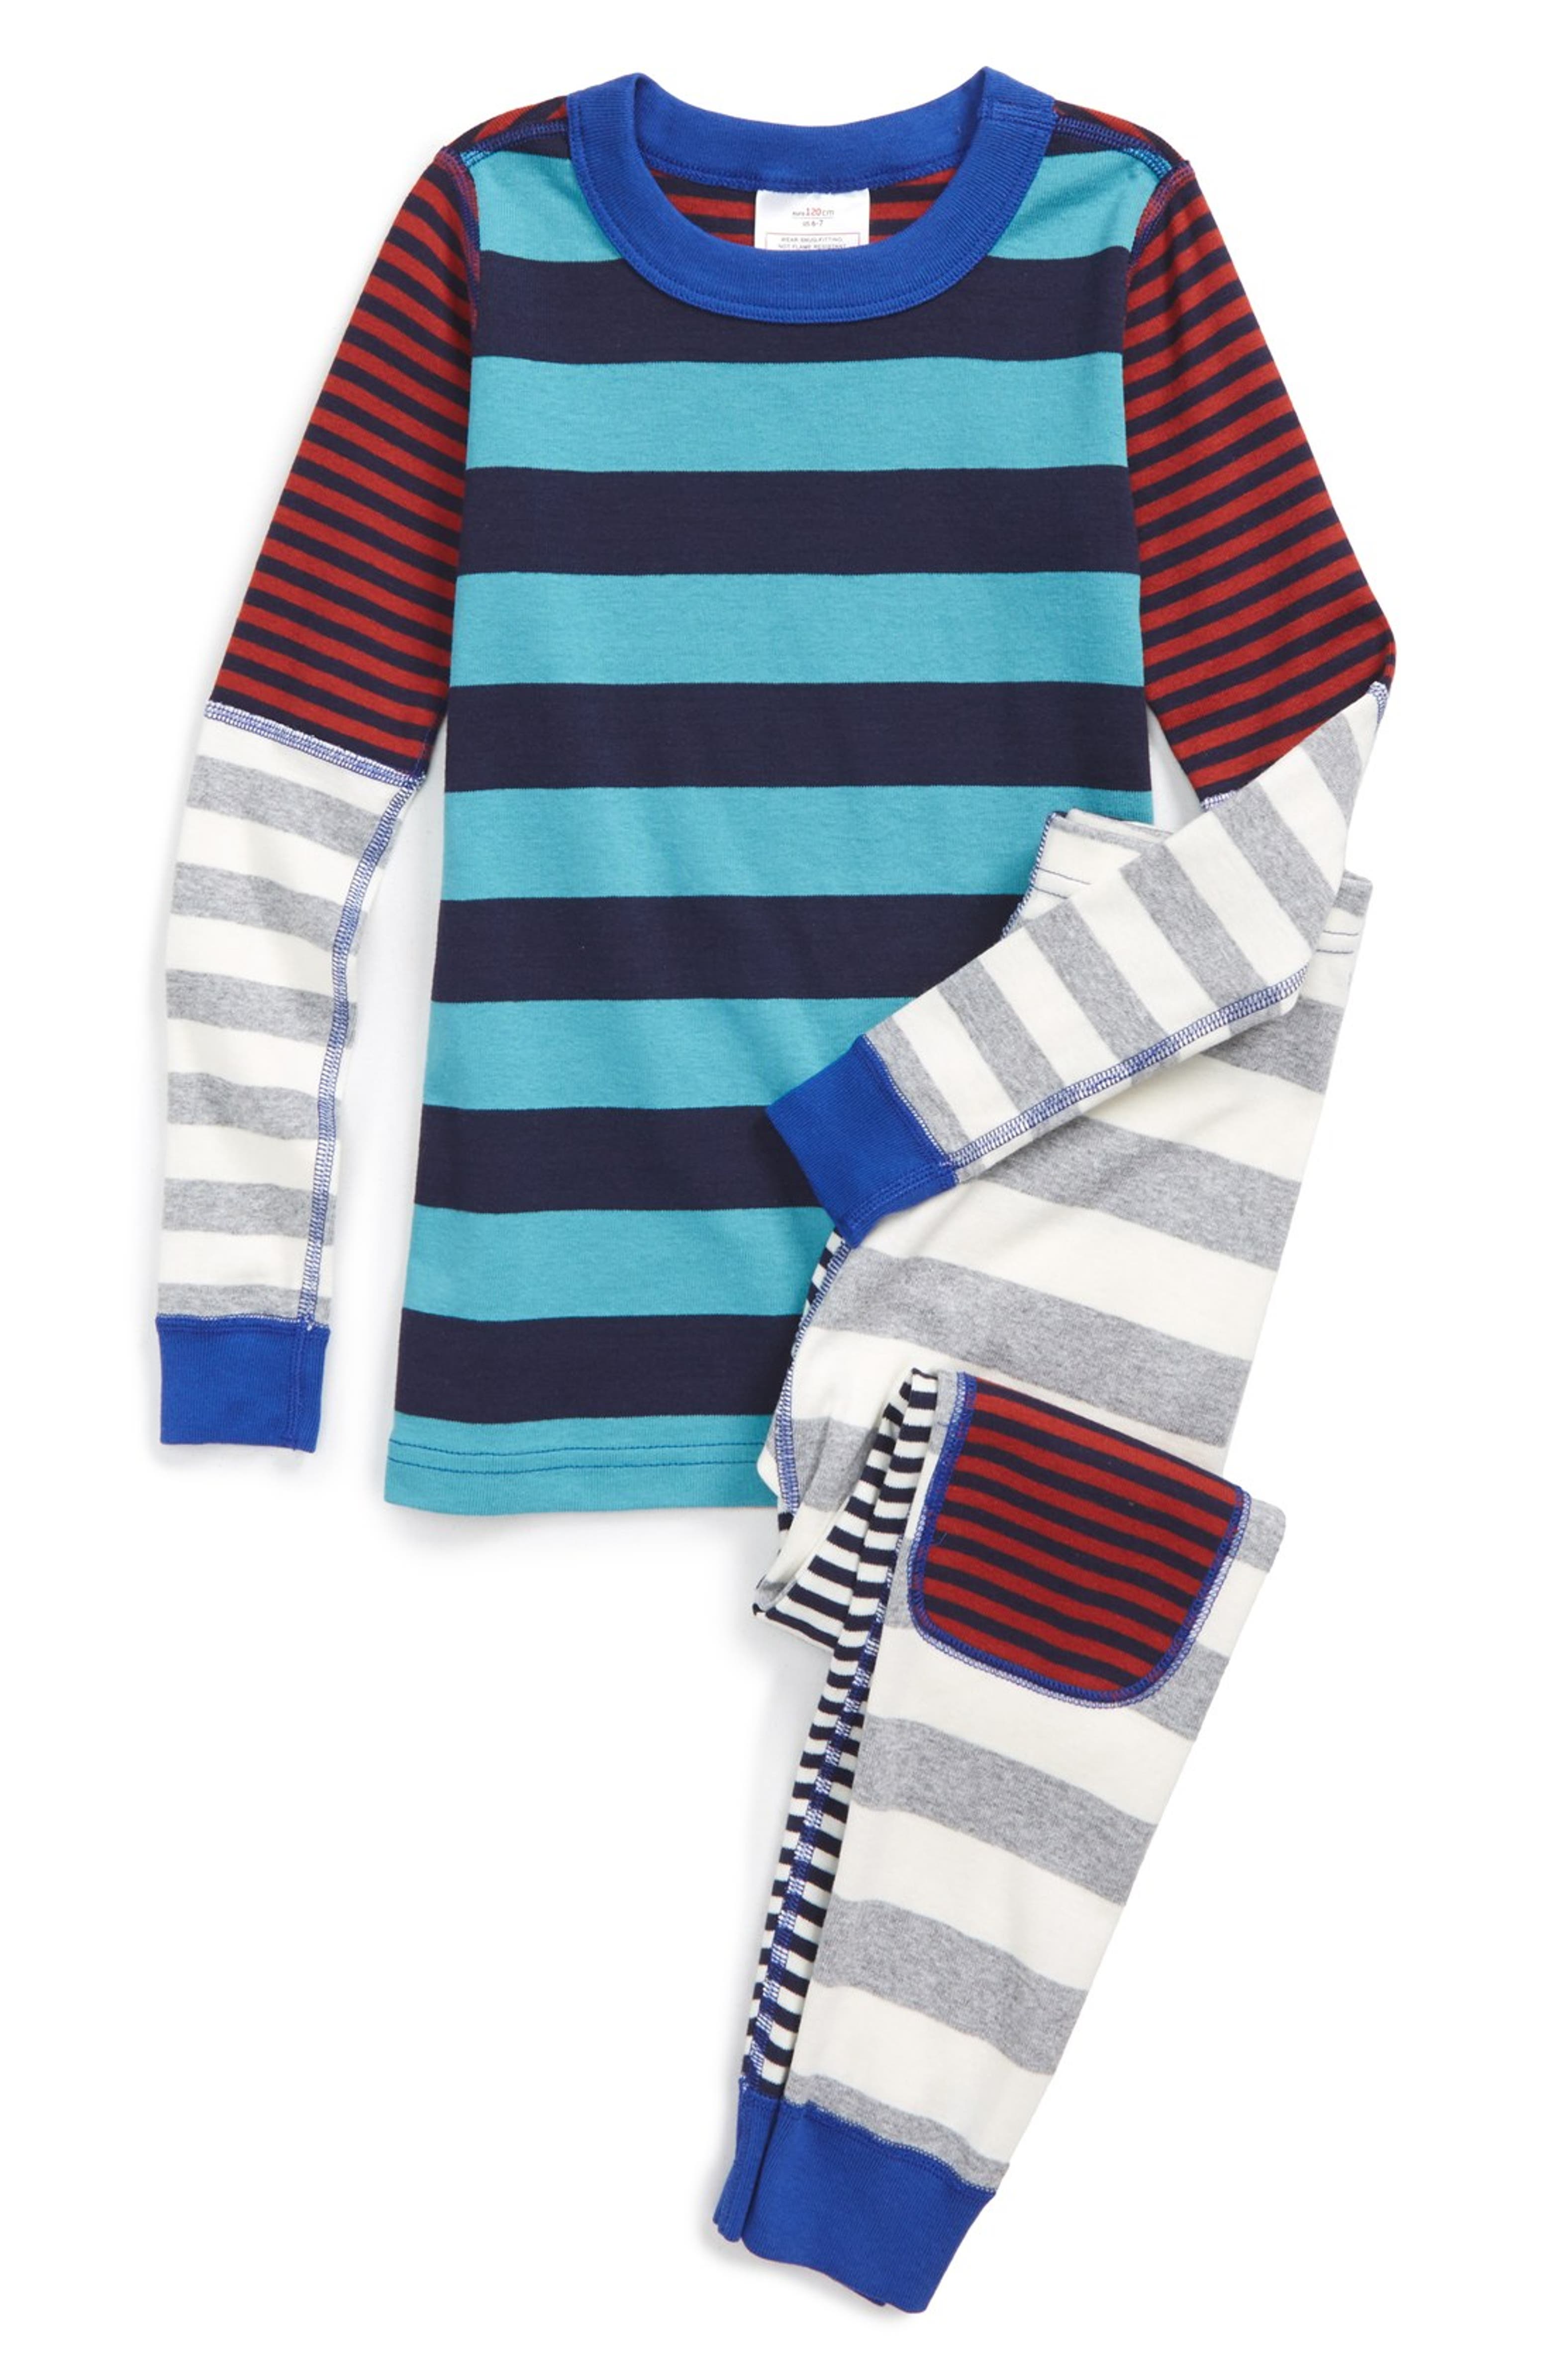 Hanna Andersson 'Crazy Stripes' Organic Cotton Two-Piece Fitted Pajamas ...